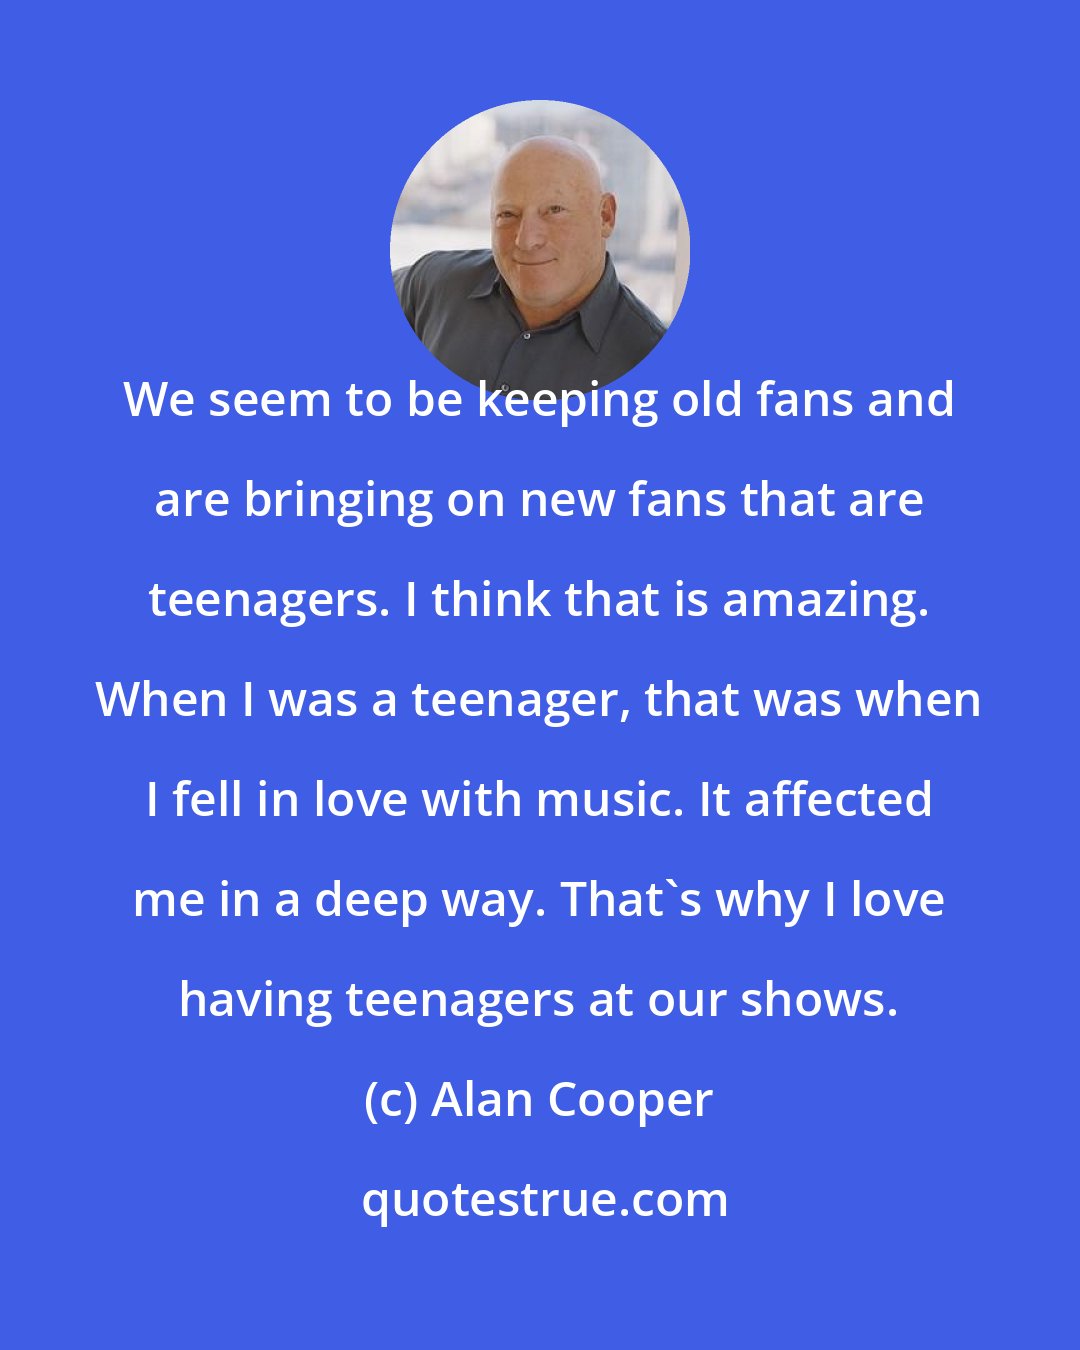 Alan Cooper: We seem to be keeping old fans and are bringing on new fans that are teenagers. I think that is amazing. When I was a teenager, that was when I fell in love with music. It affected me in a deep way. That's why I love having teenagers at our shows.